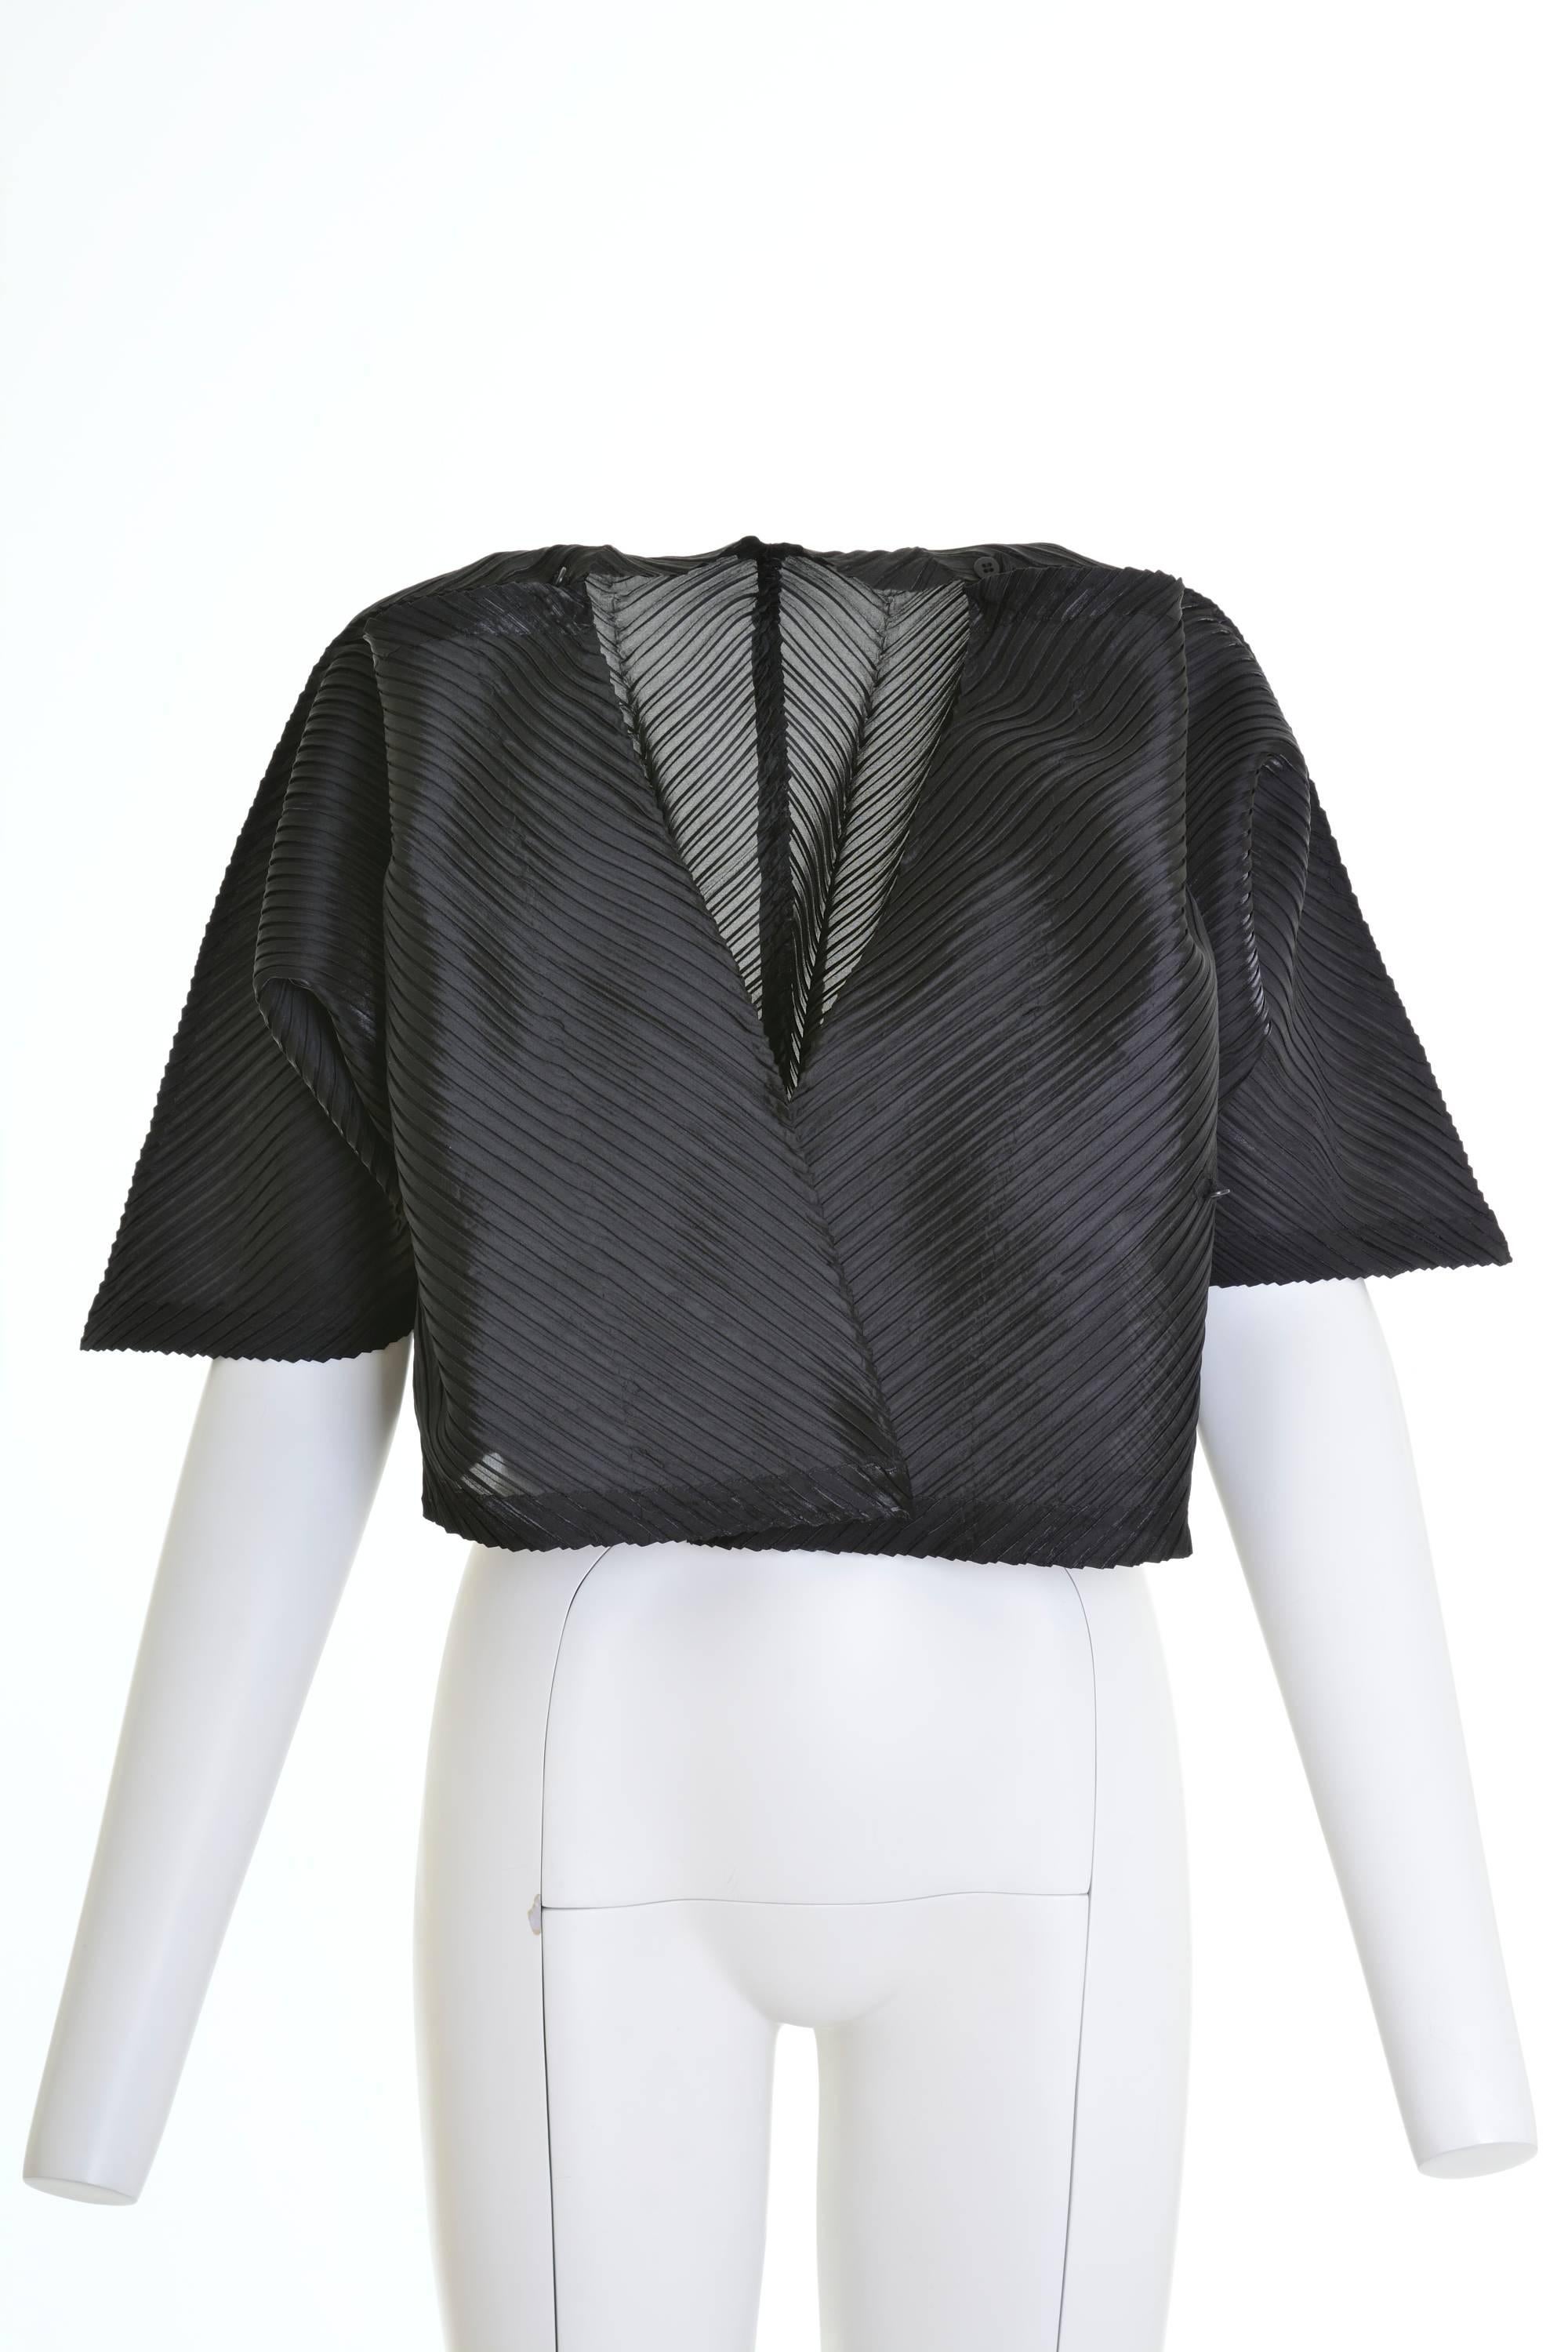 Women's ISSEY MIYAKE Black Pleateds Shirt Top For Sale